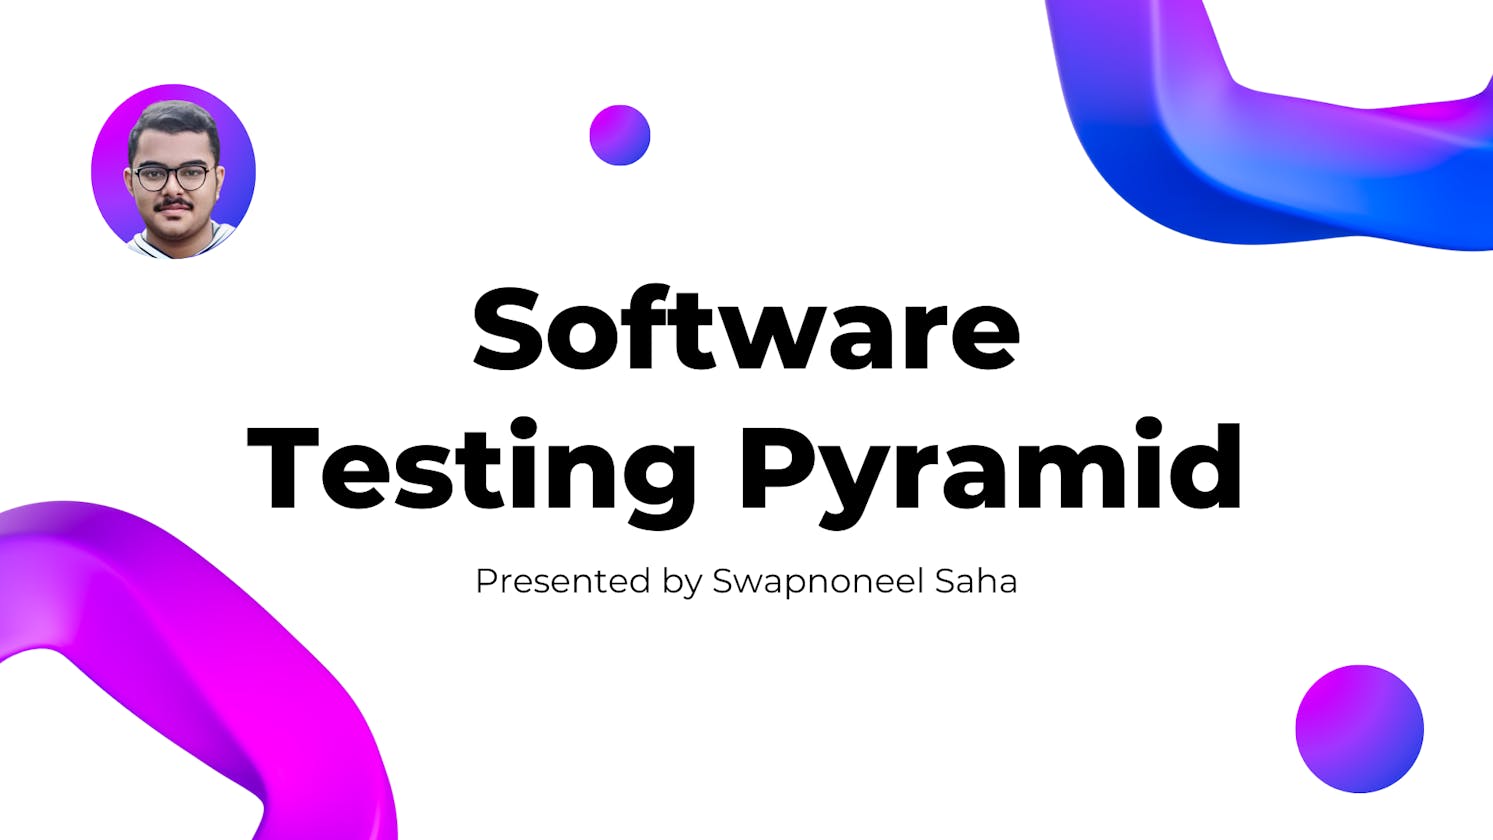 Understanding the different levels of the Software Testing Pyramid